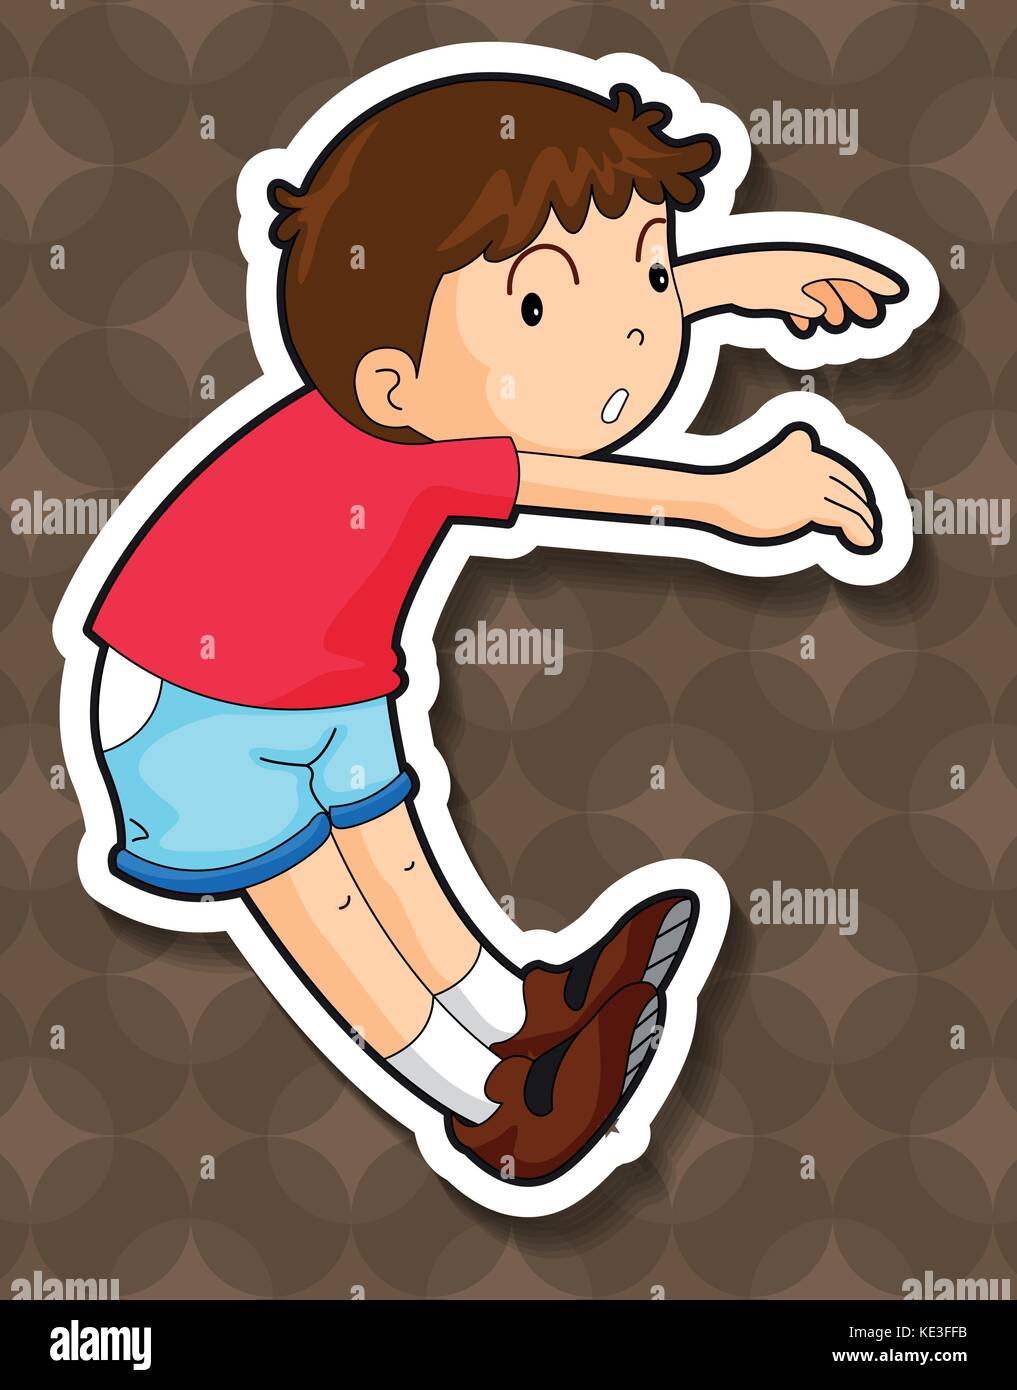 Little boy in red jumping illustration Stock Vector